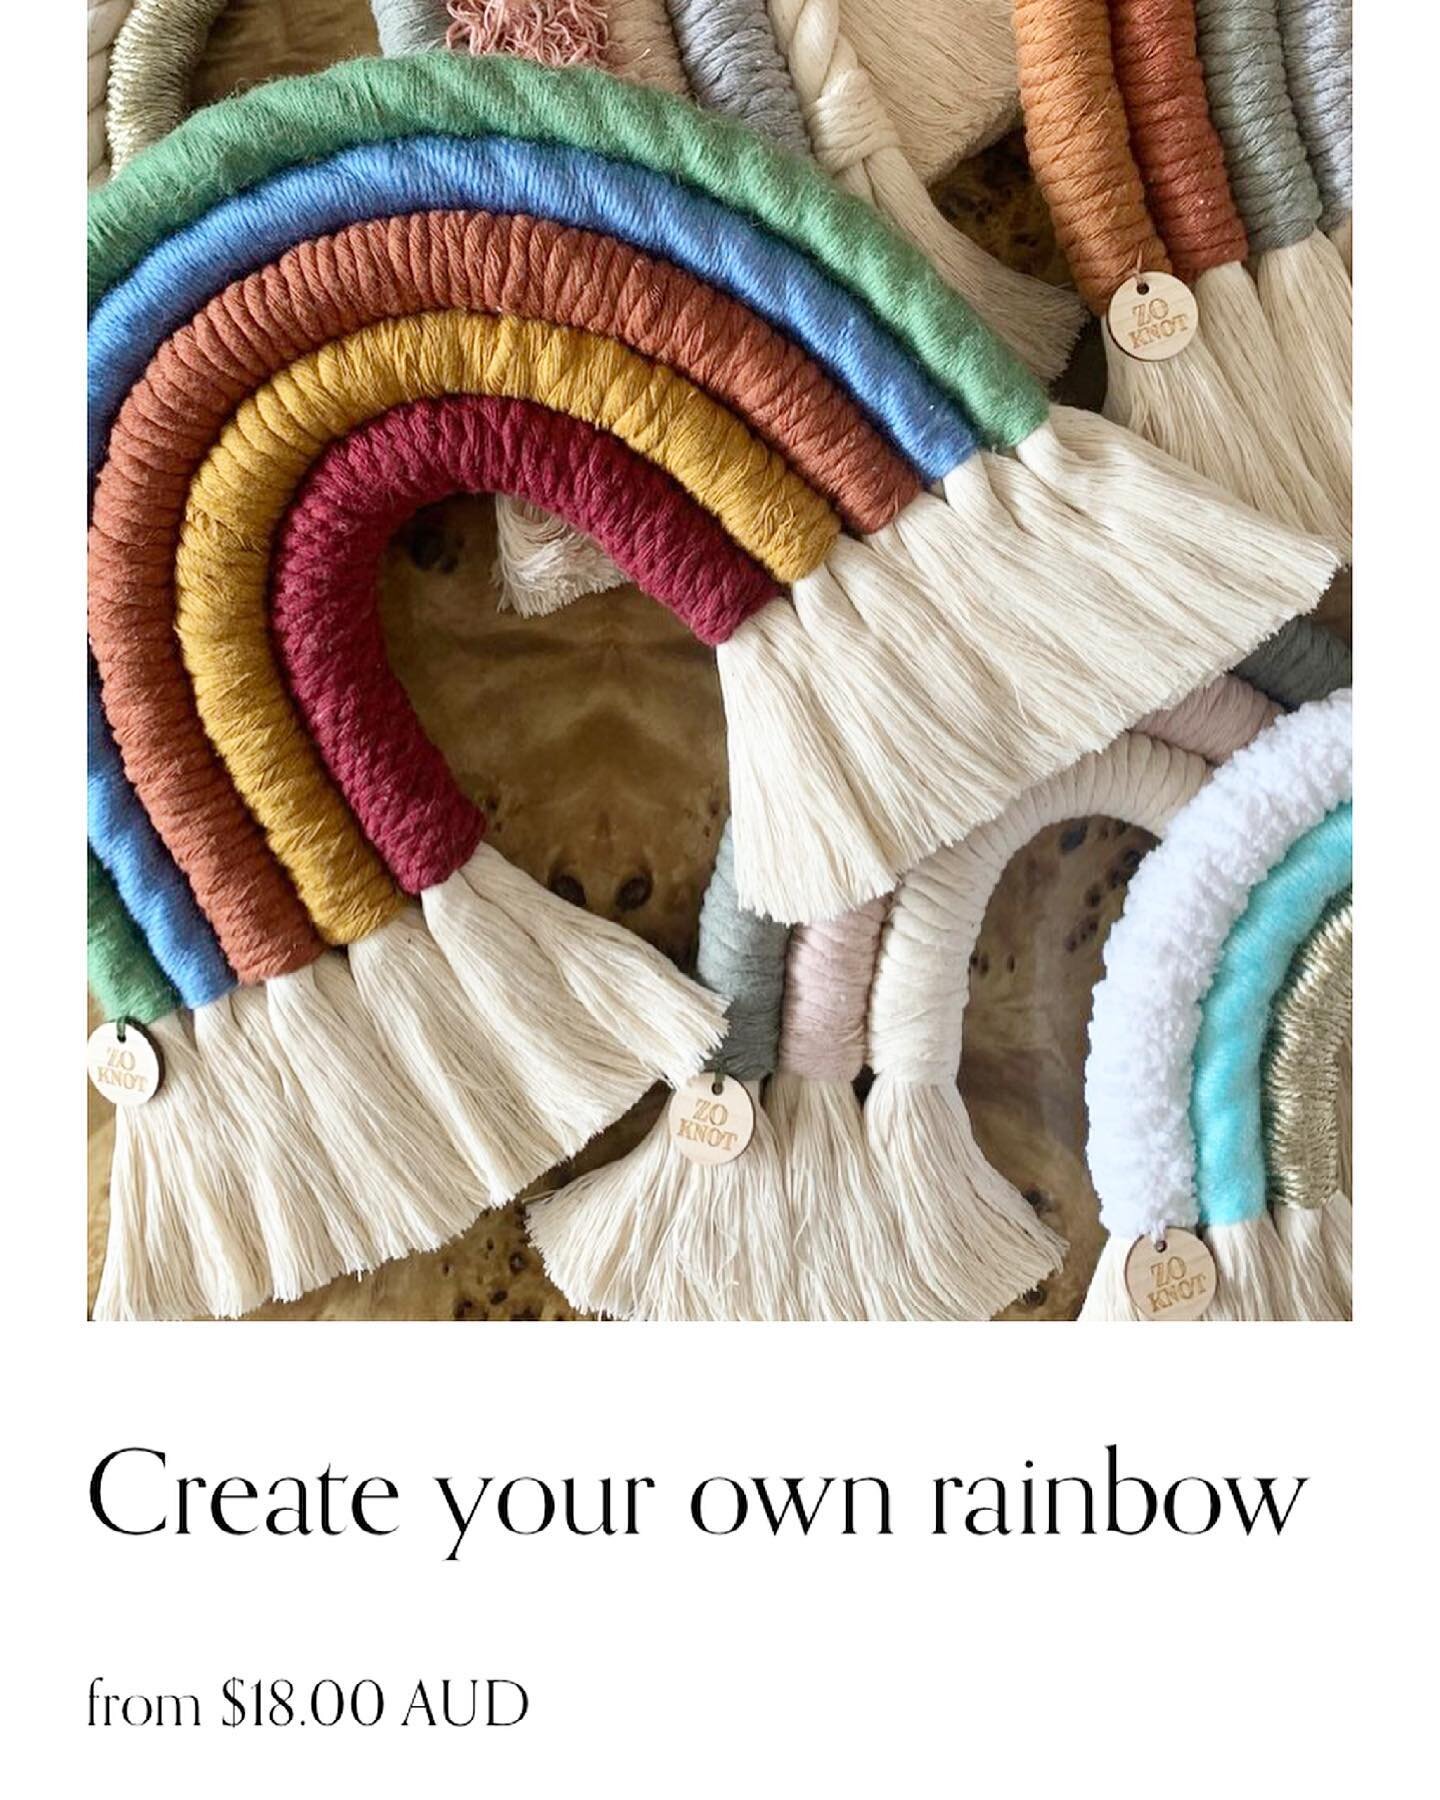 ✨Do you want to create your own rainbow?✨
.
Well, you are now able to select a customised rainbow on our website! From over 50 shades of colour &amp; textures to choose from, you can request colour selections &amp; I will provide you with a sample sw